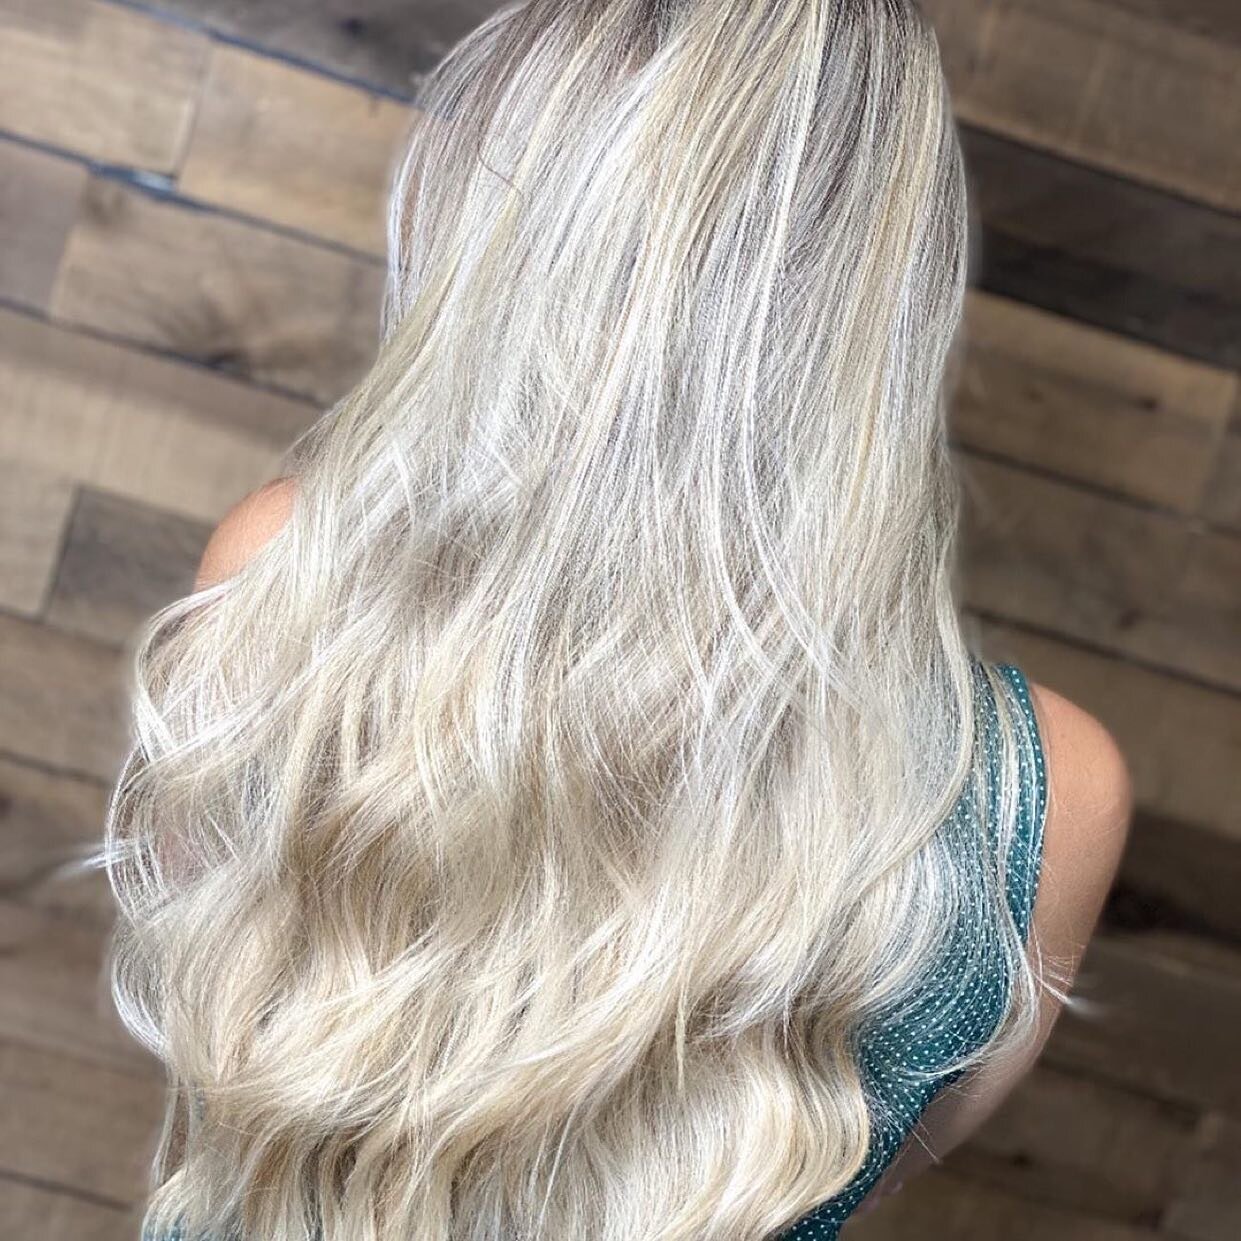 Repost from @hairbylindseyrose
&bull;
Who is ready to have icy hair for the winter!!! Just because it's getting close to winter doesn't mean your hair had to be dull! Just change it up with a new toner and add an icy blonde gloss to make it pop!! 
.
